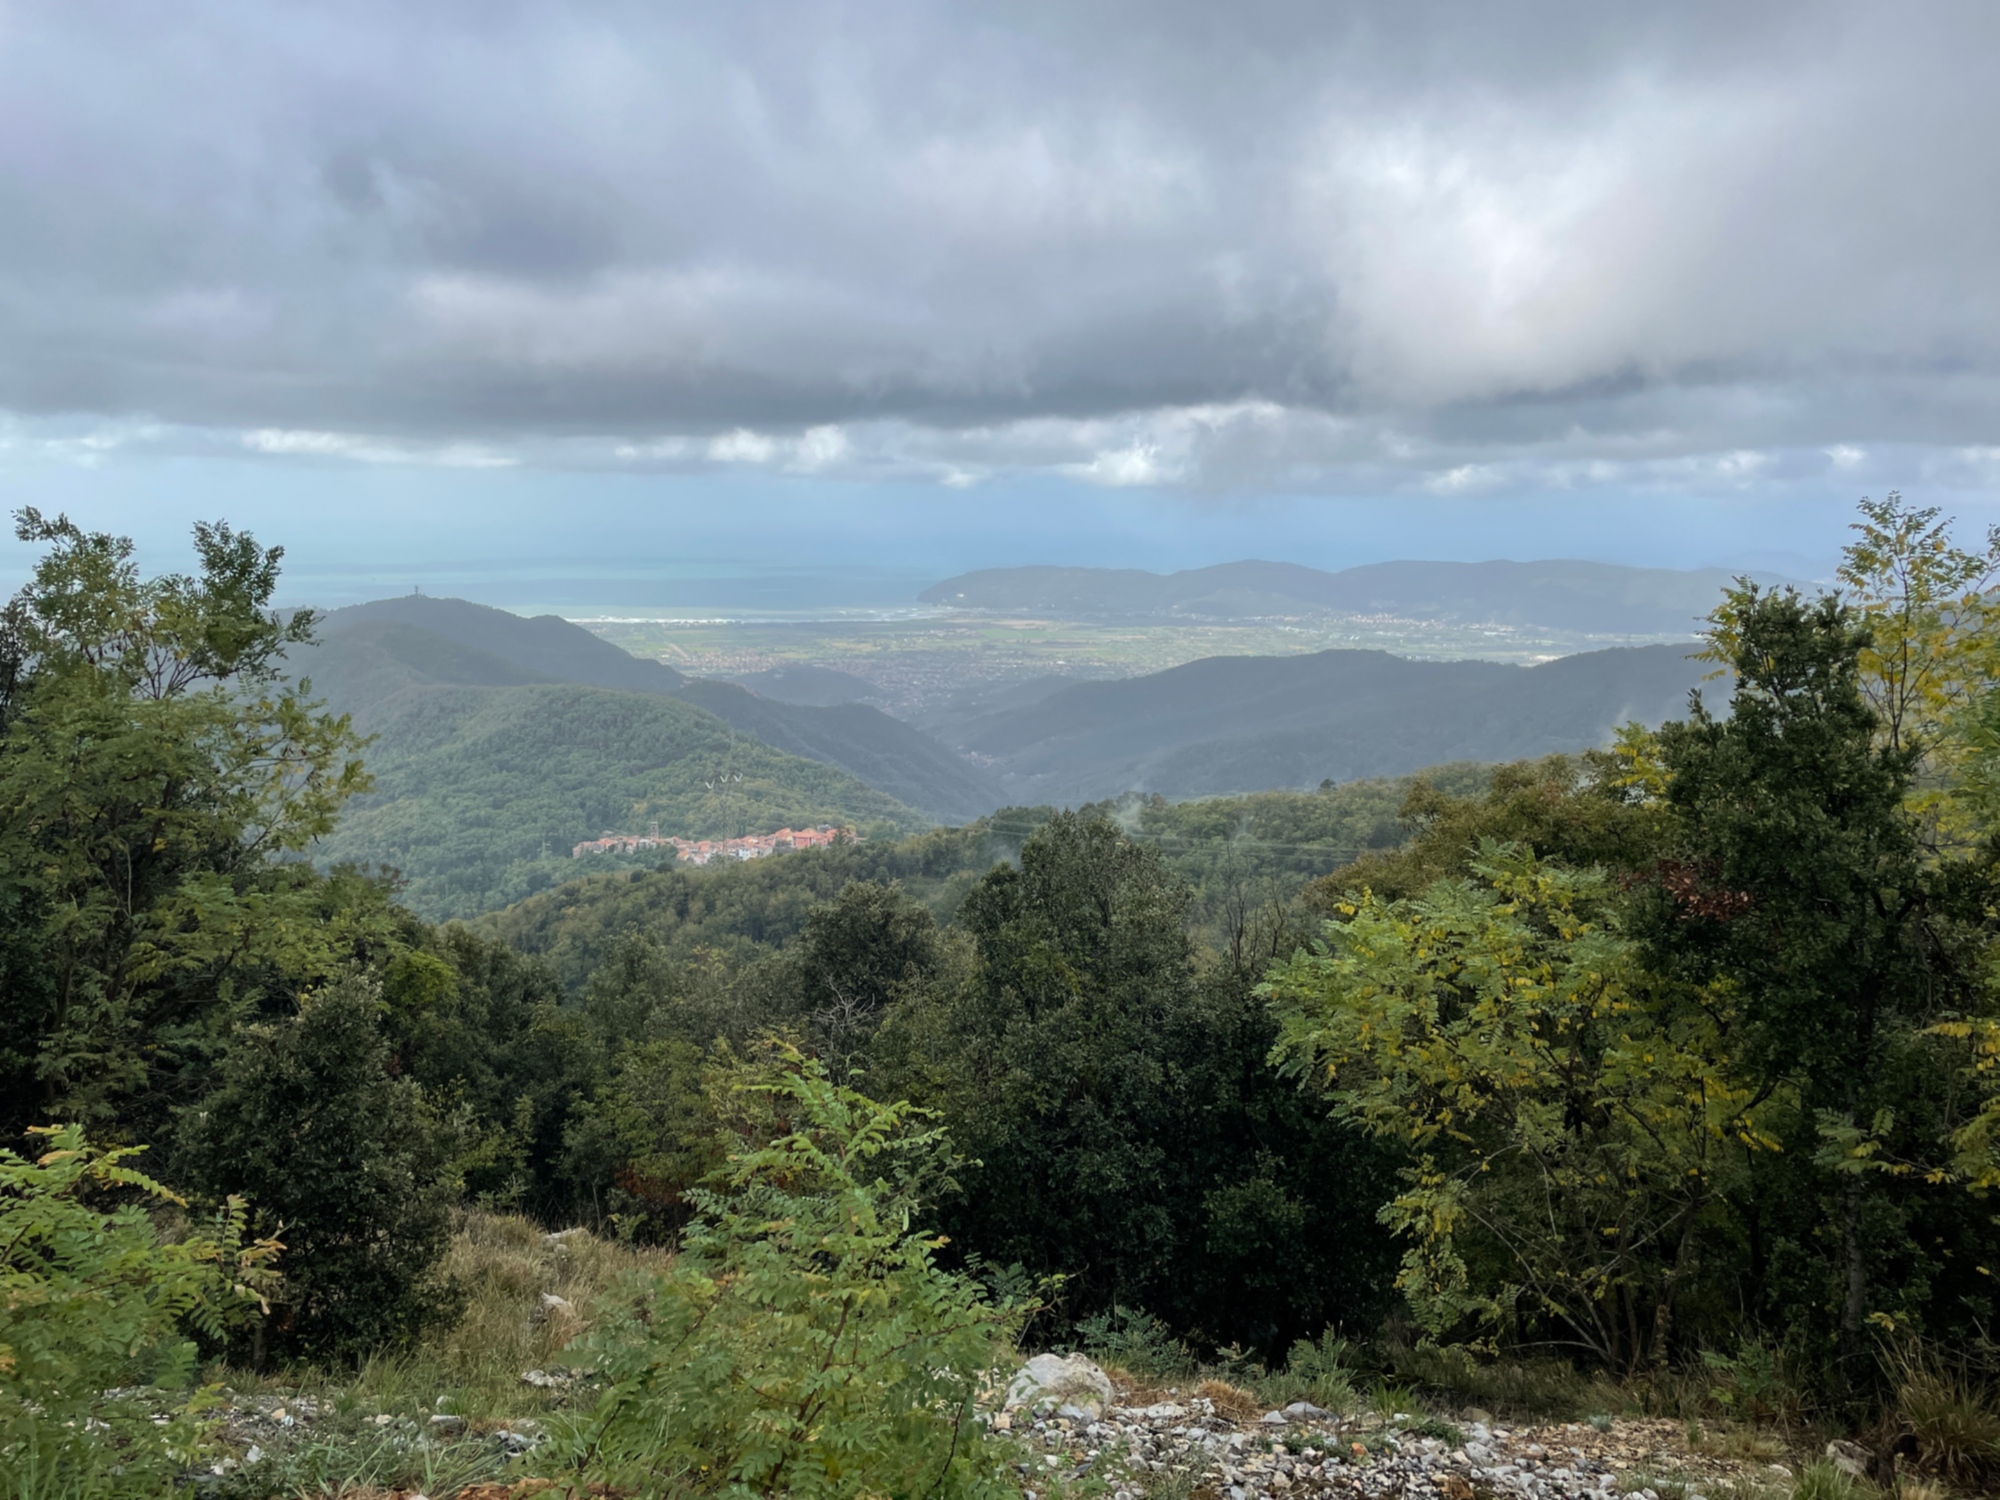 Forests and views of the Apuan Riviera